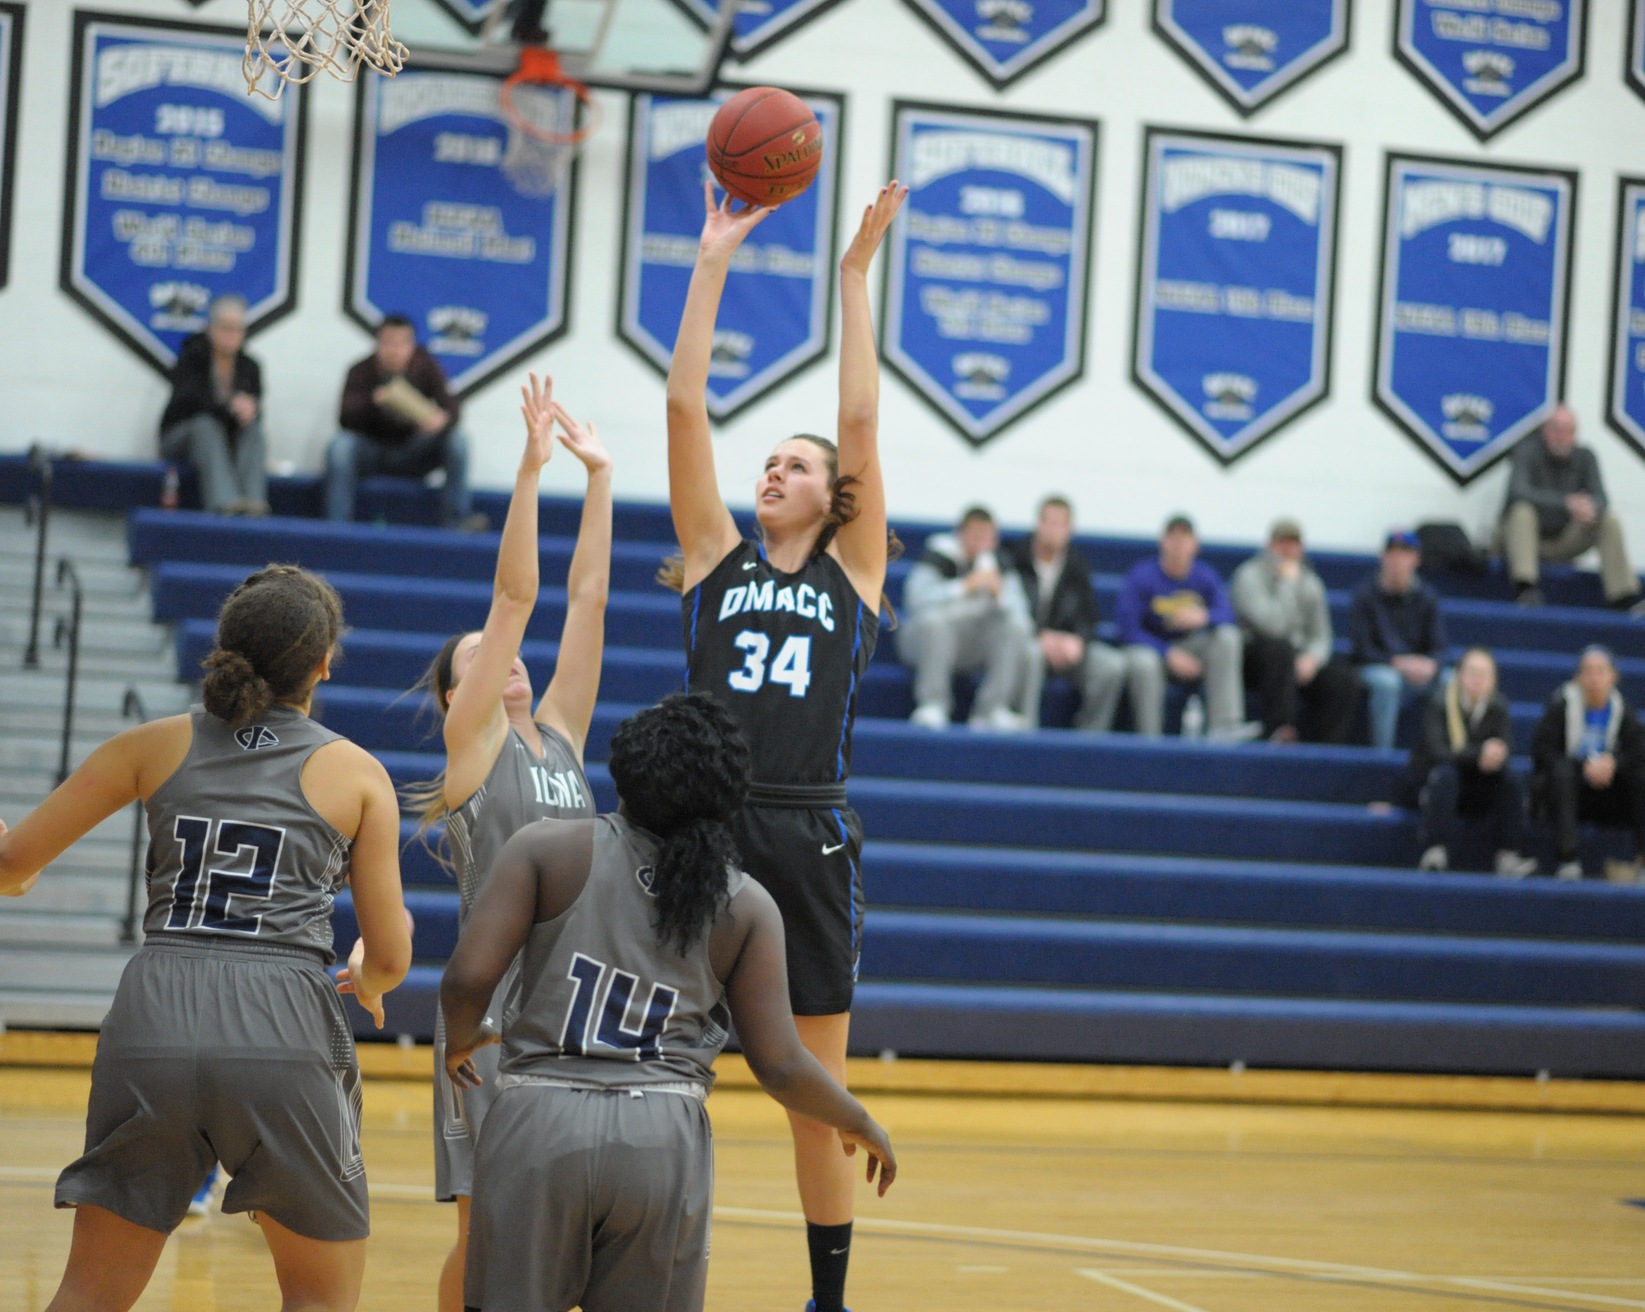 Ellie Horn going up for layup.